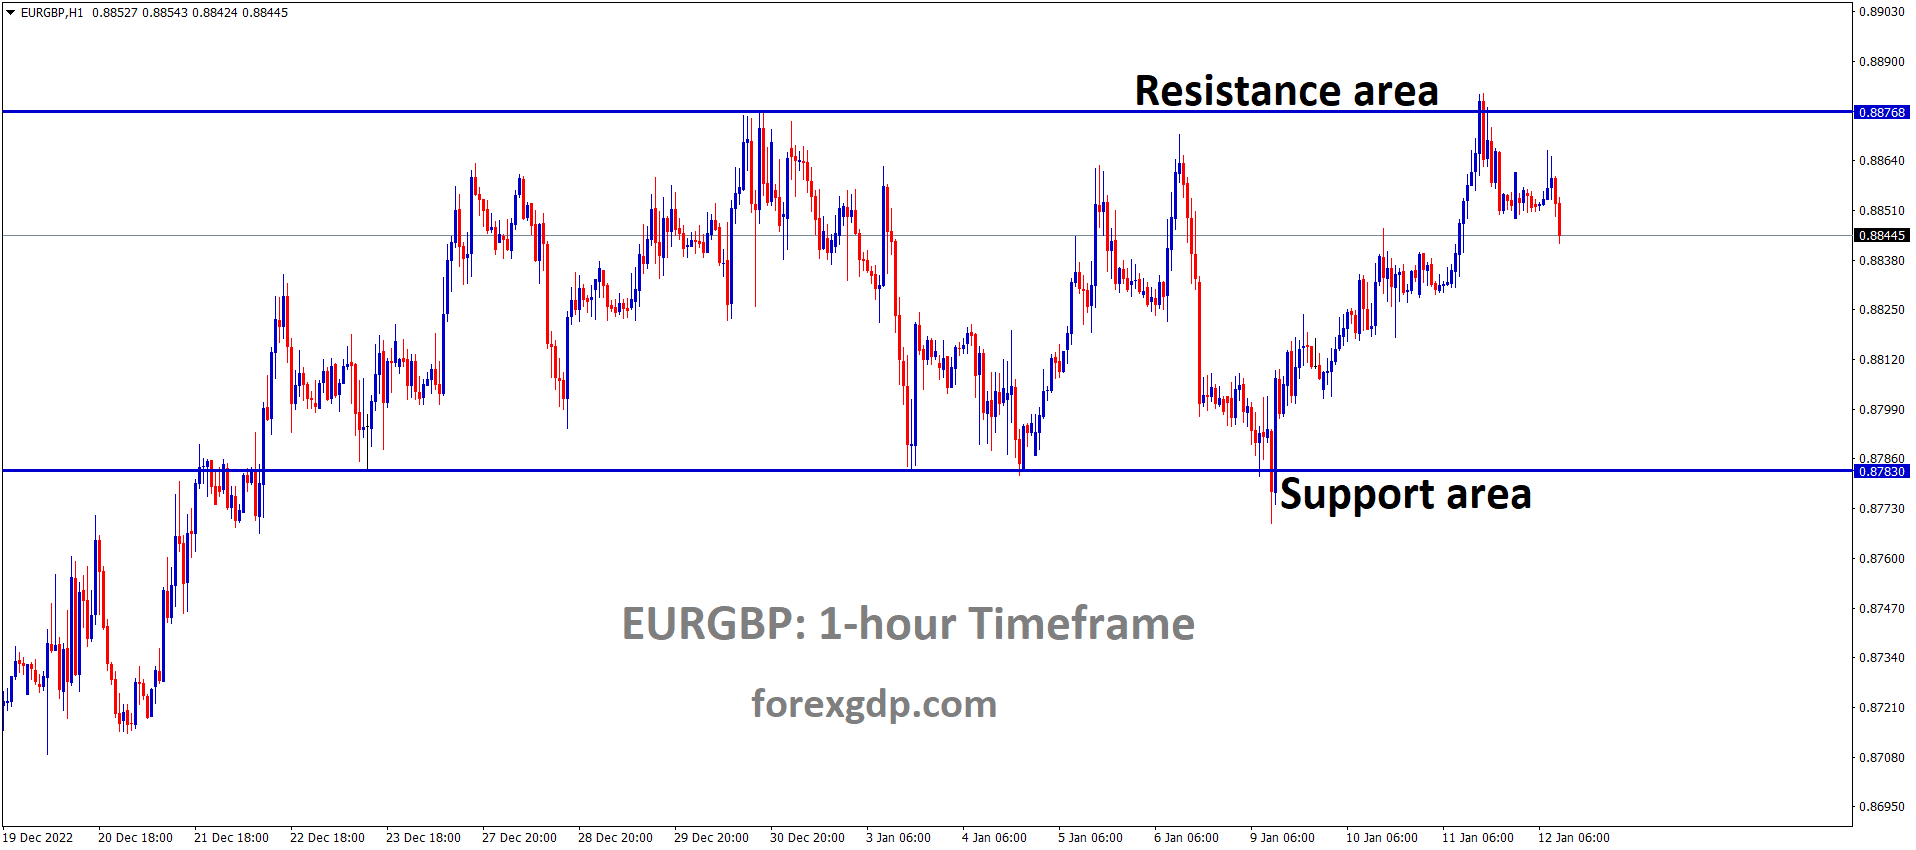 EURGBP is moving in the Box pattern and the market has fallen from the resistance area of the pattern